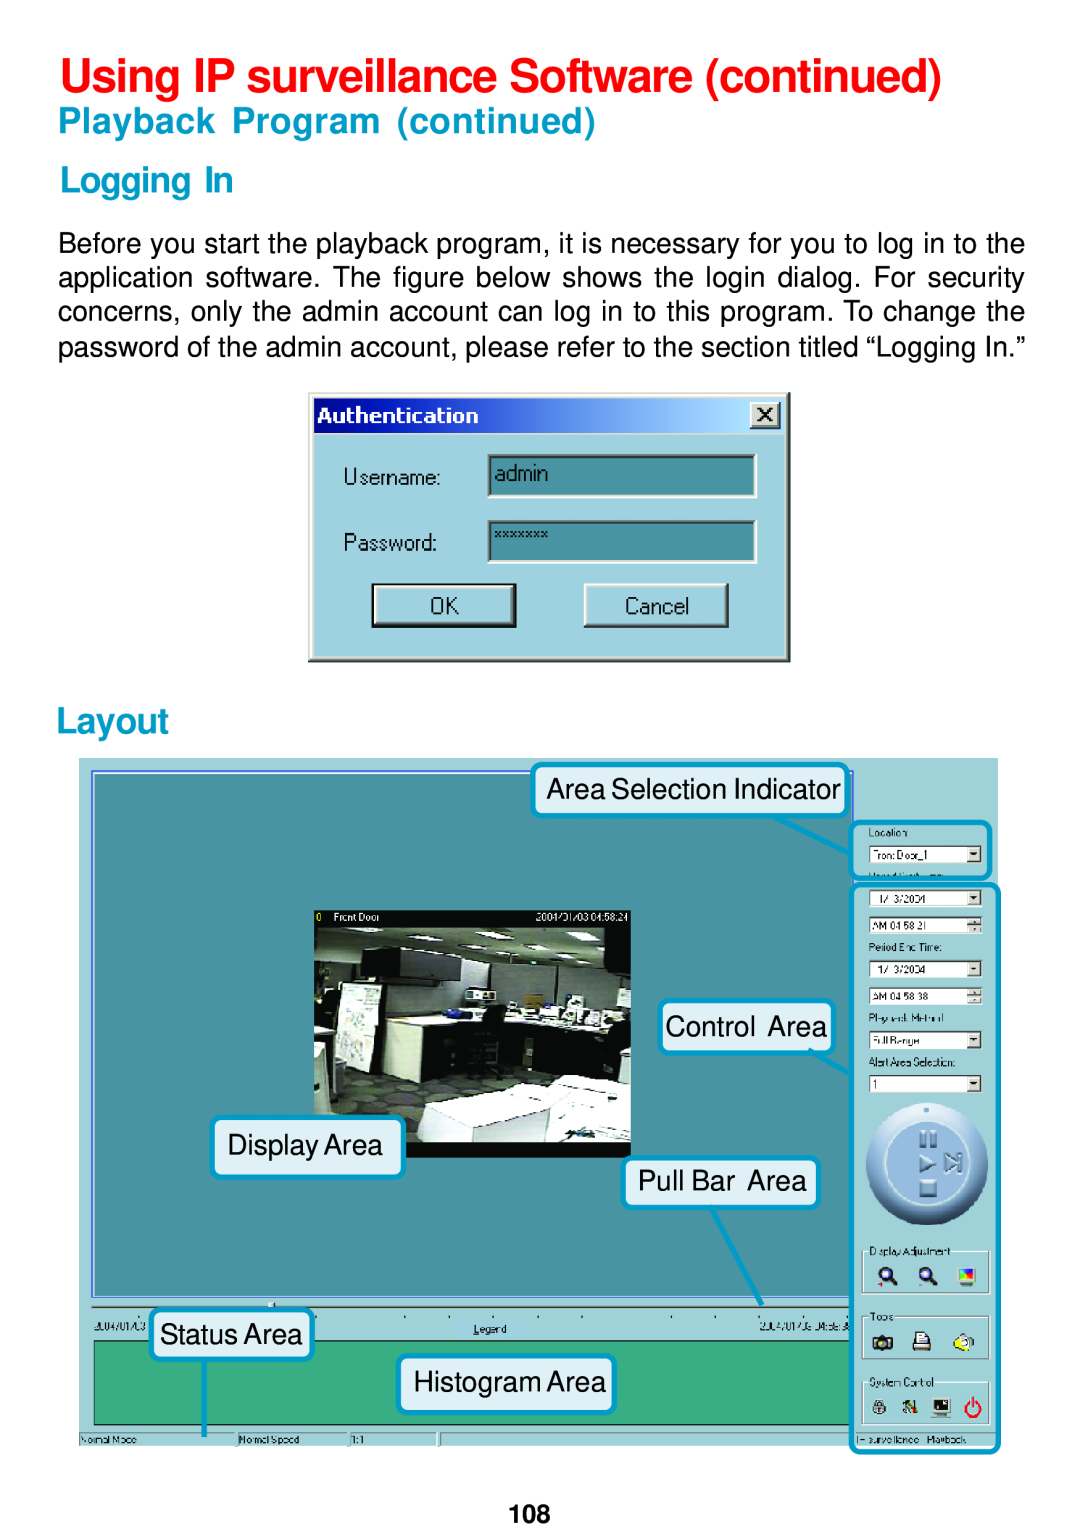 D-Link DCS-5300 manual Playback Program continued Logging In, Layout, Using IP surveillance Software continued 